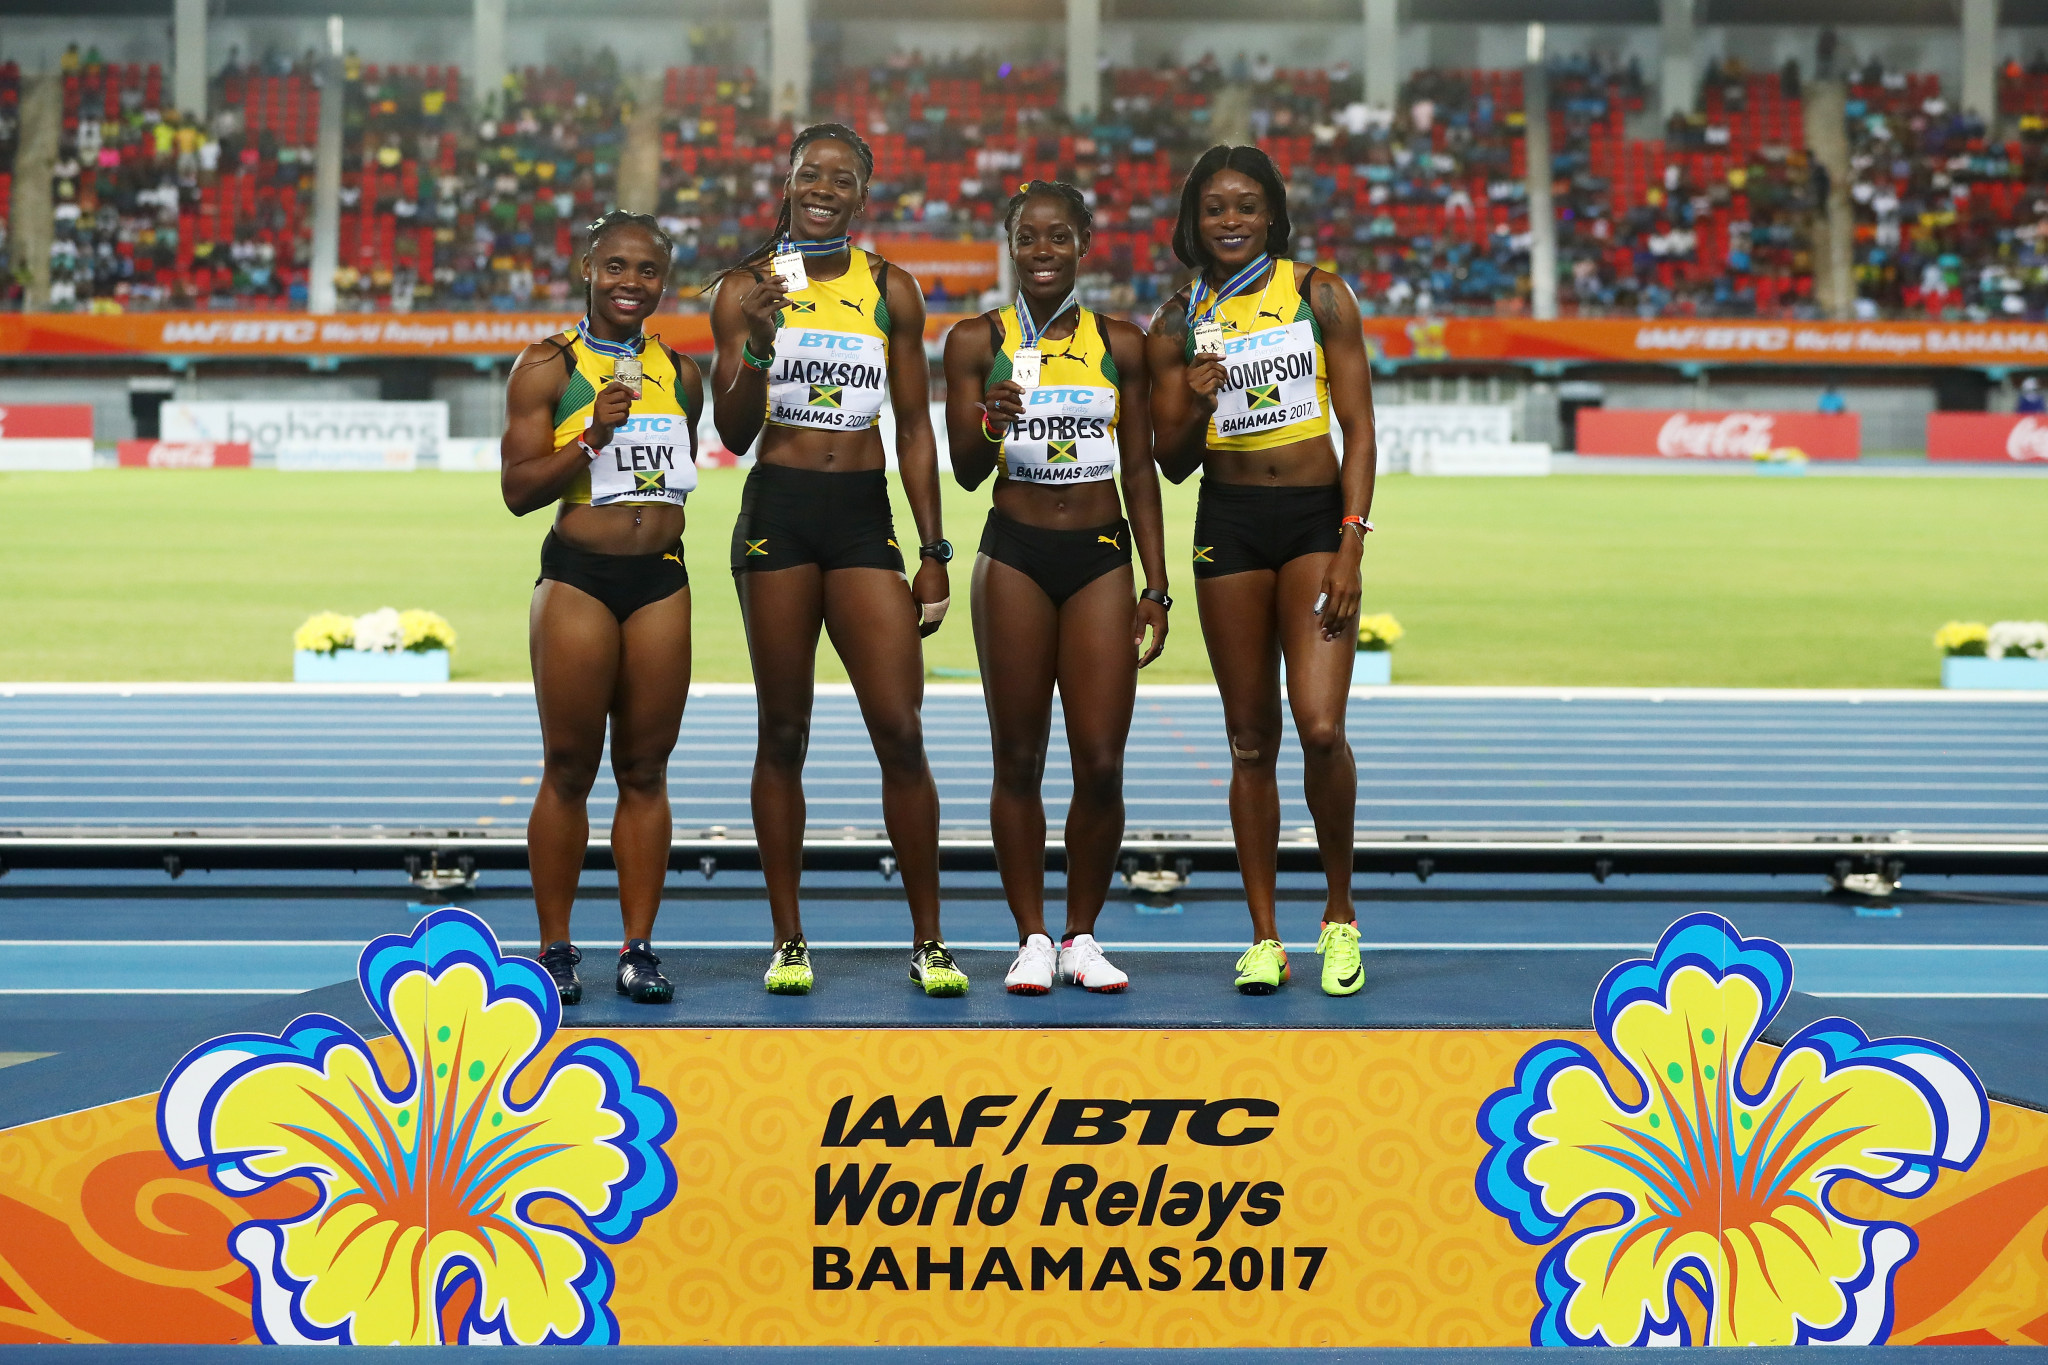 Jamaica will not step in to host 2019 IAAF World Relays due to lack of Government backing